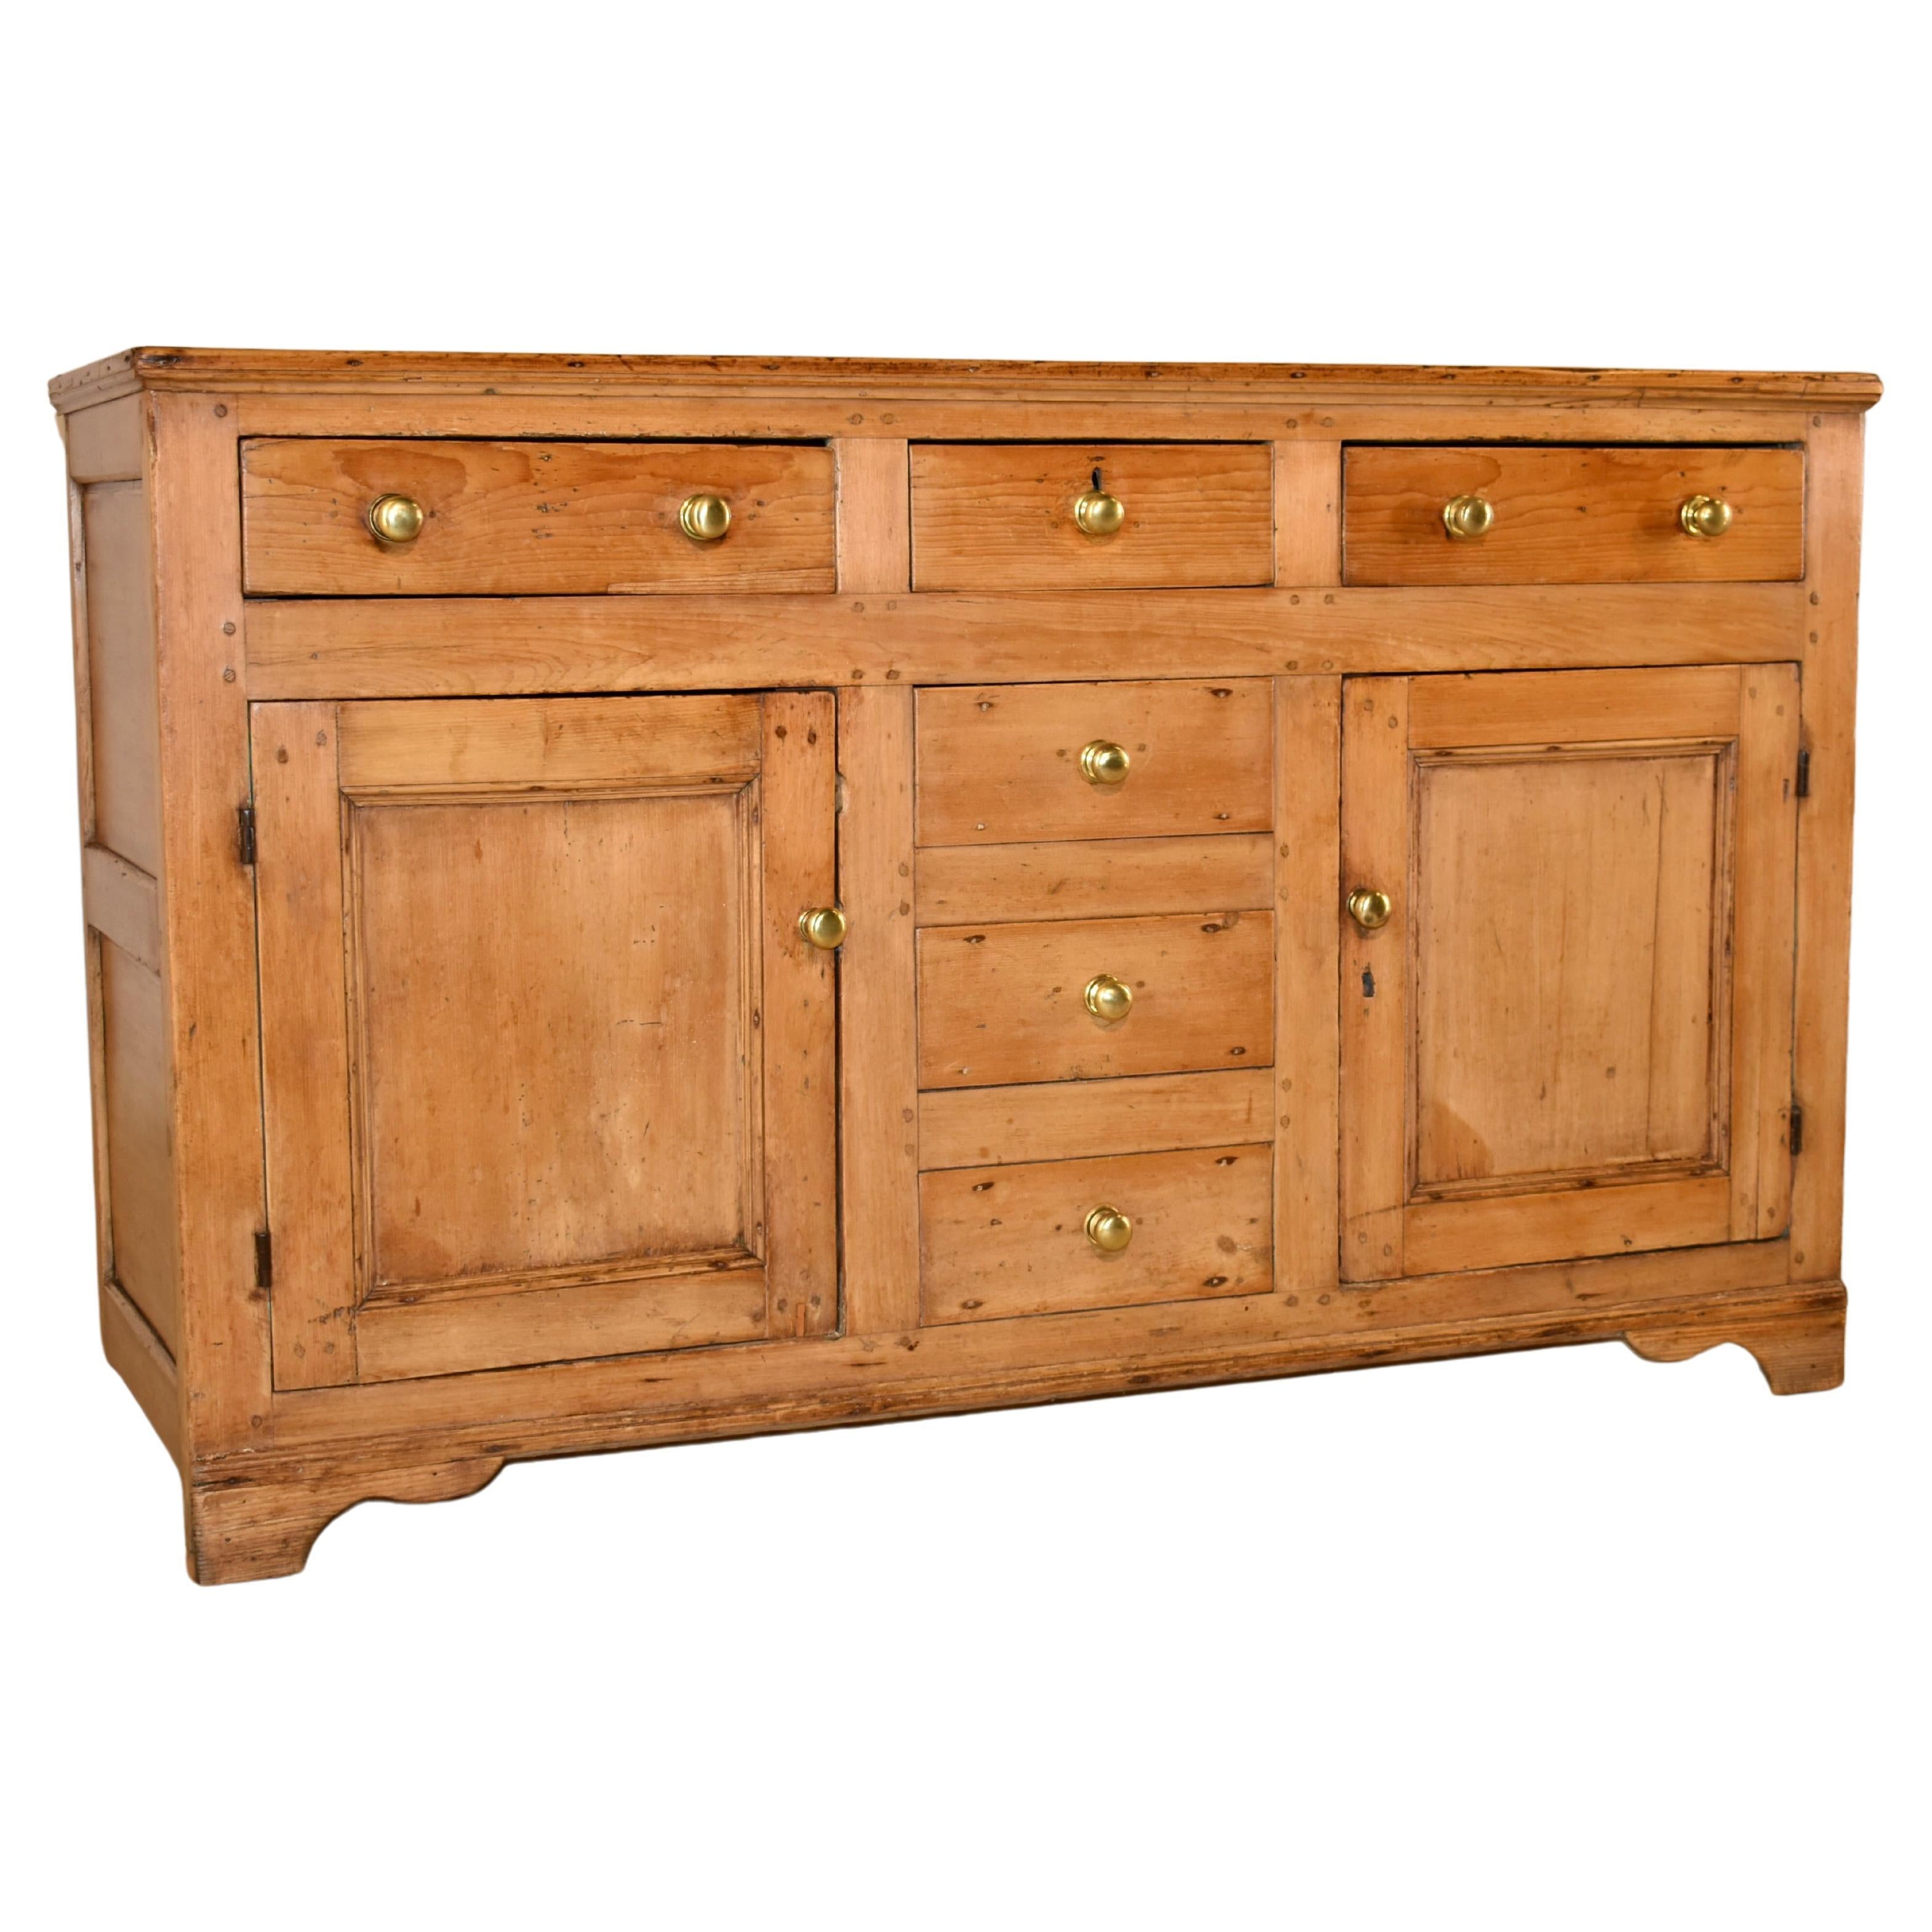 Late 18th century Georgian pine dresser base from England.  the top is made from two planks, and follows down to hand paneled sides.  the front of the piece has three top drawers over a central bank of three false drawers, flanked by single paneled